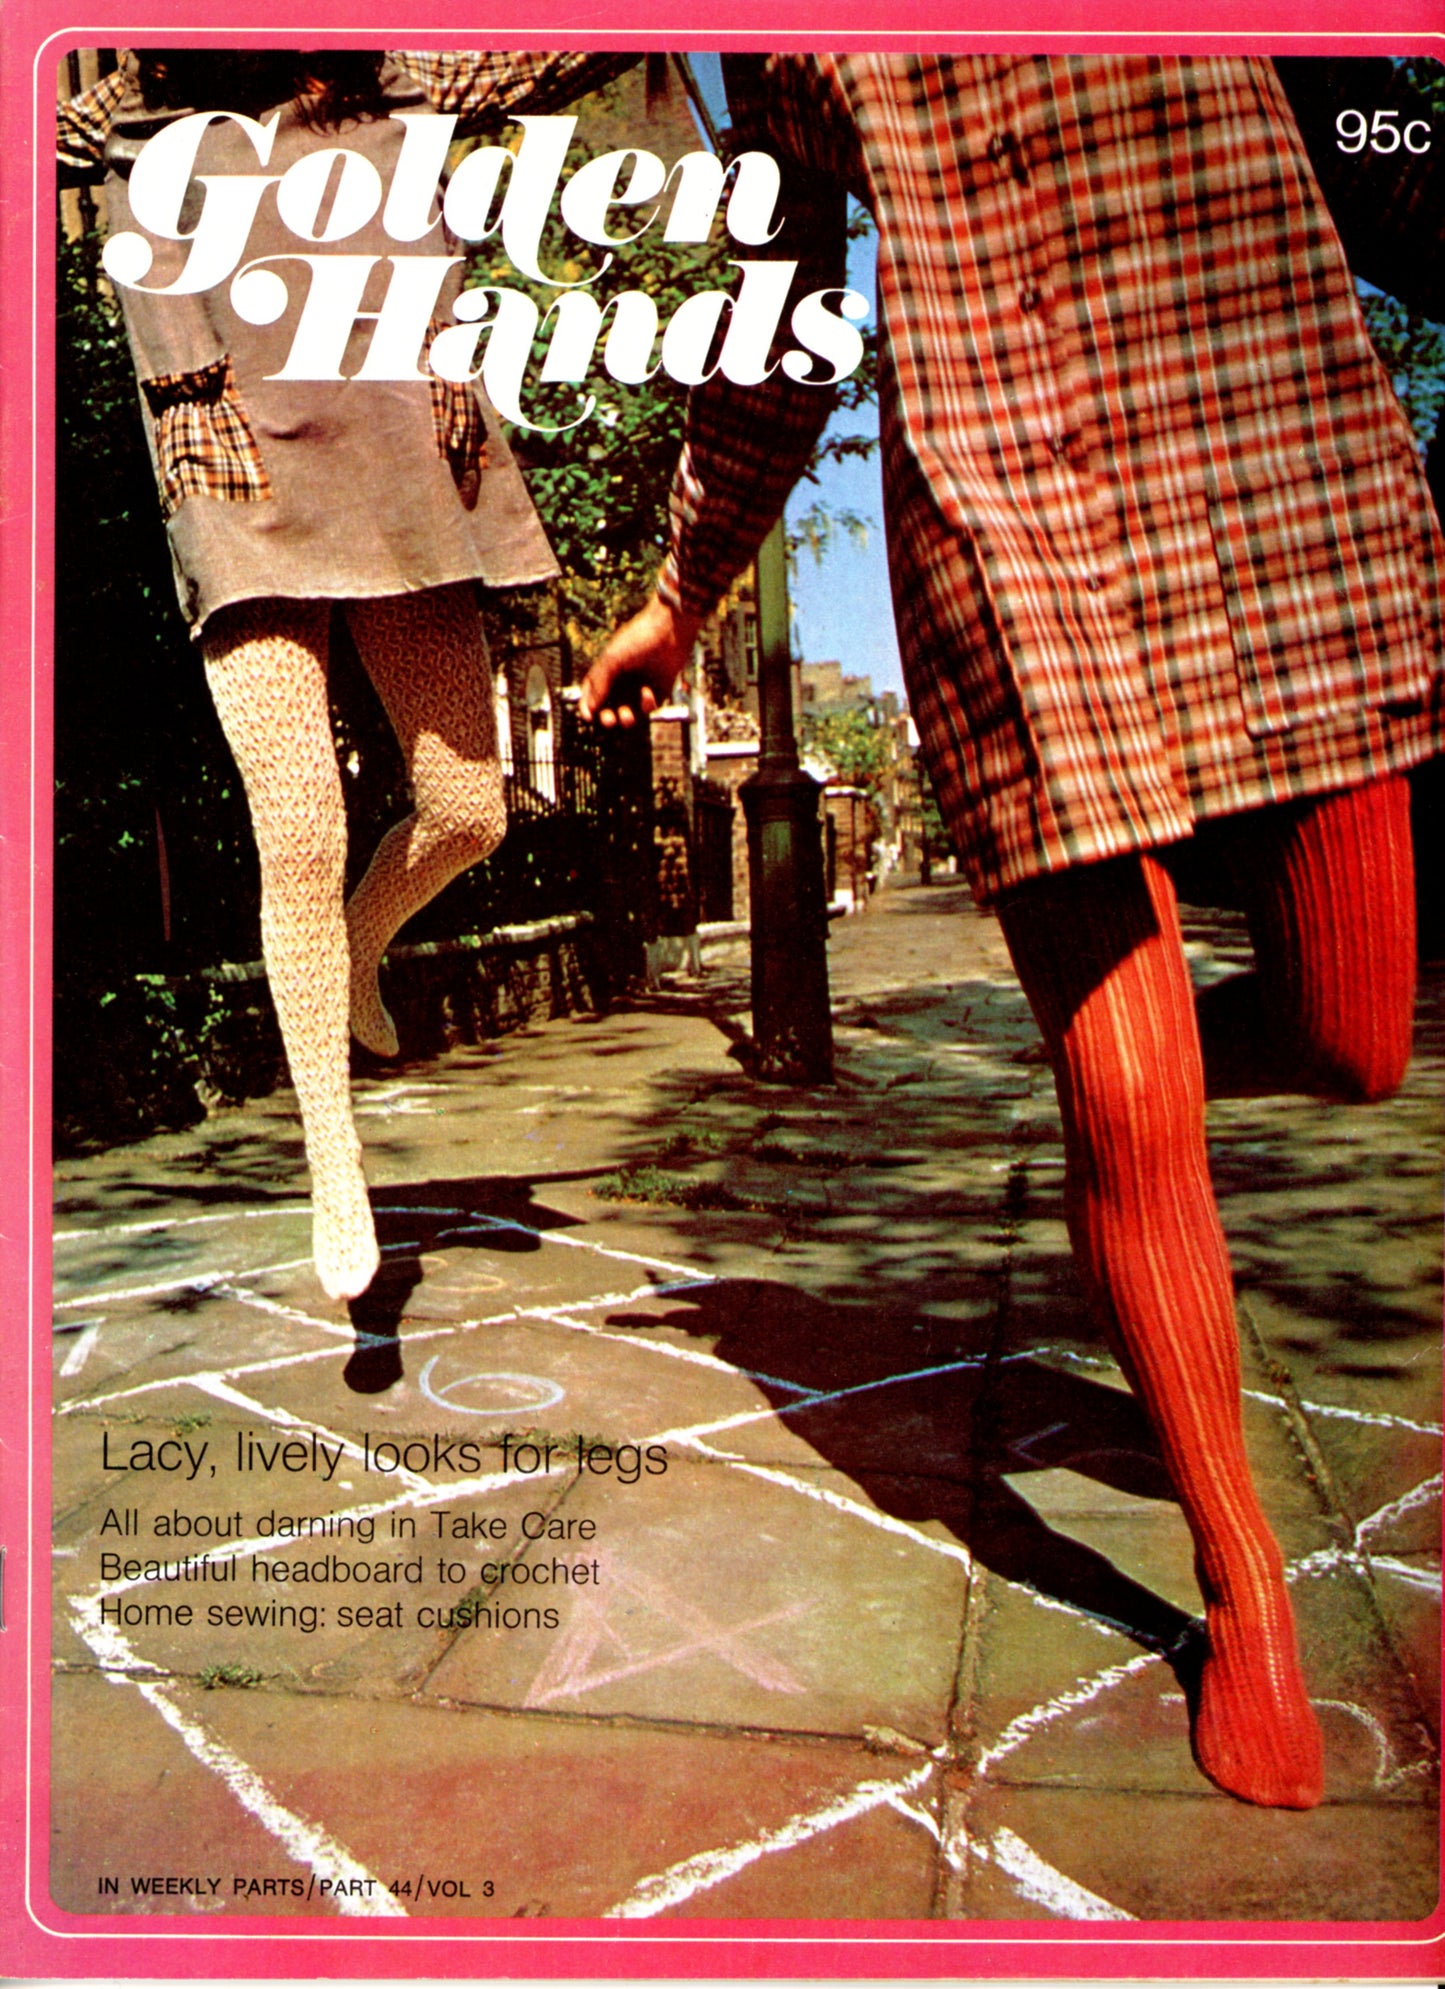 GOLDEN HANDS Publication by Marshall Cavendish London ©1971 Volume 2 Parts 31 - 58 Sold Each